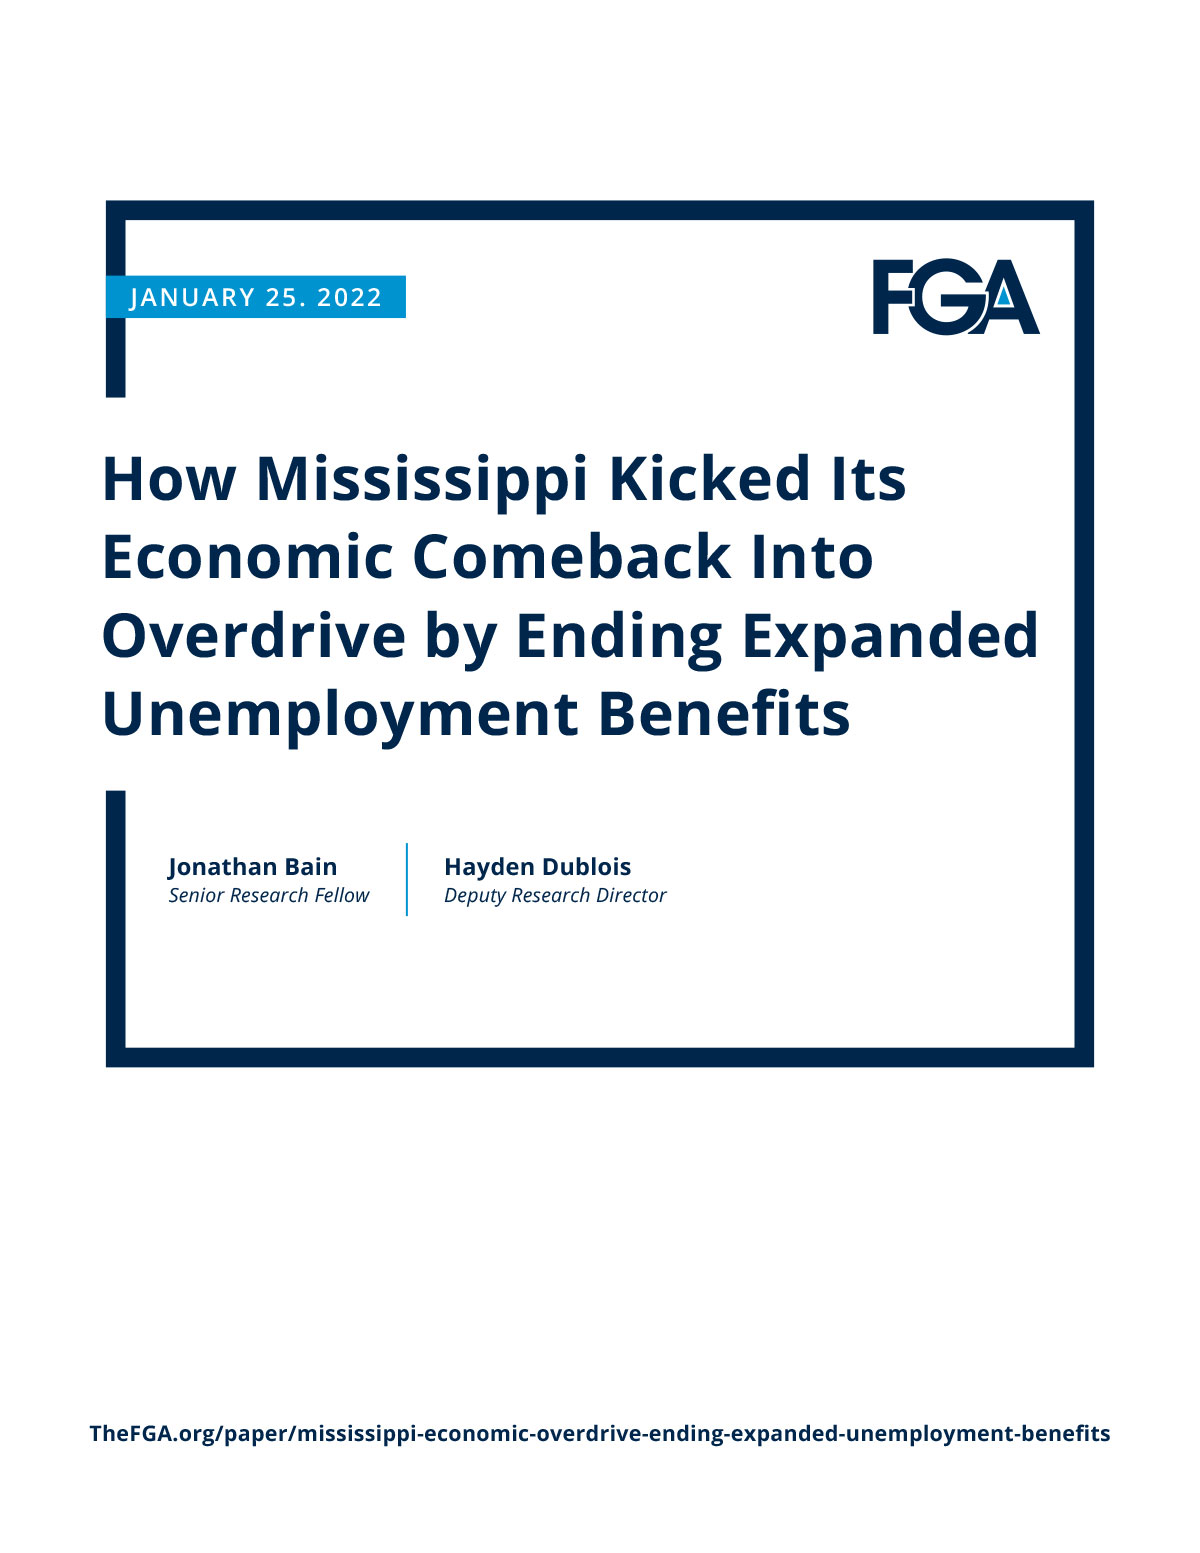 How Mississippi Kicked Its Economic Comeback Into Overdrive by Ending Expanded Unemployment Benefits